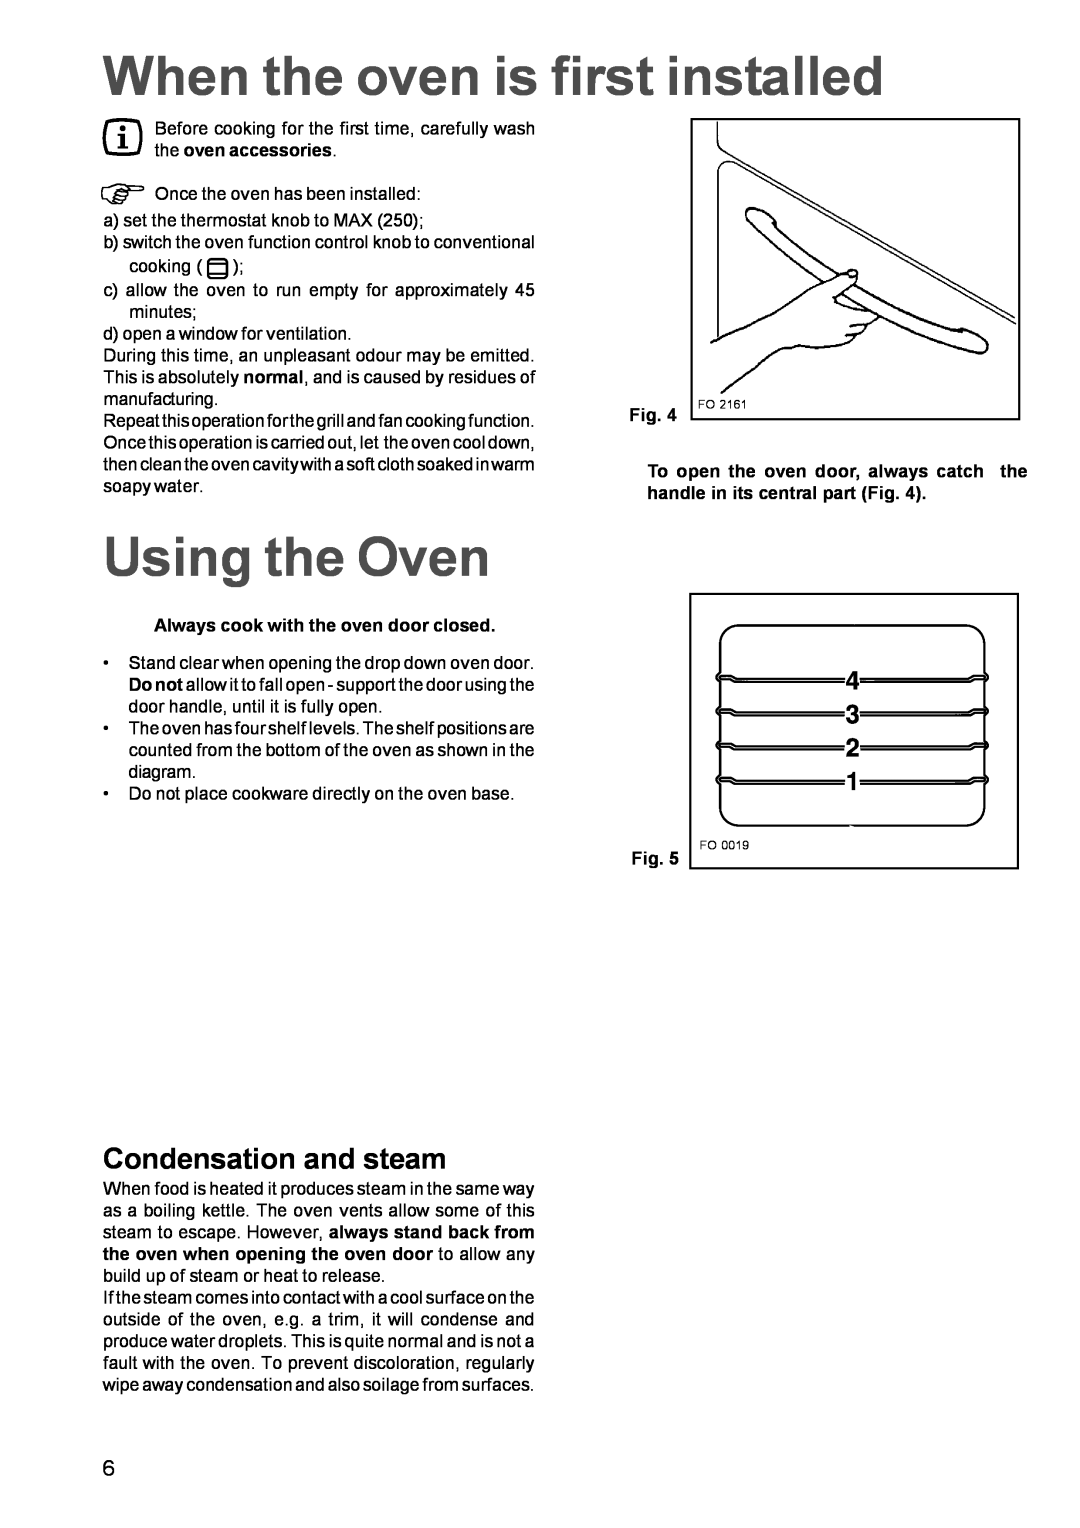 Zanussi manual When the oven is first installed, Using the Oven, Condensation and steam, 4 3 